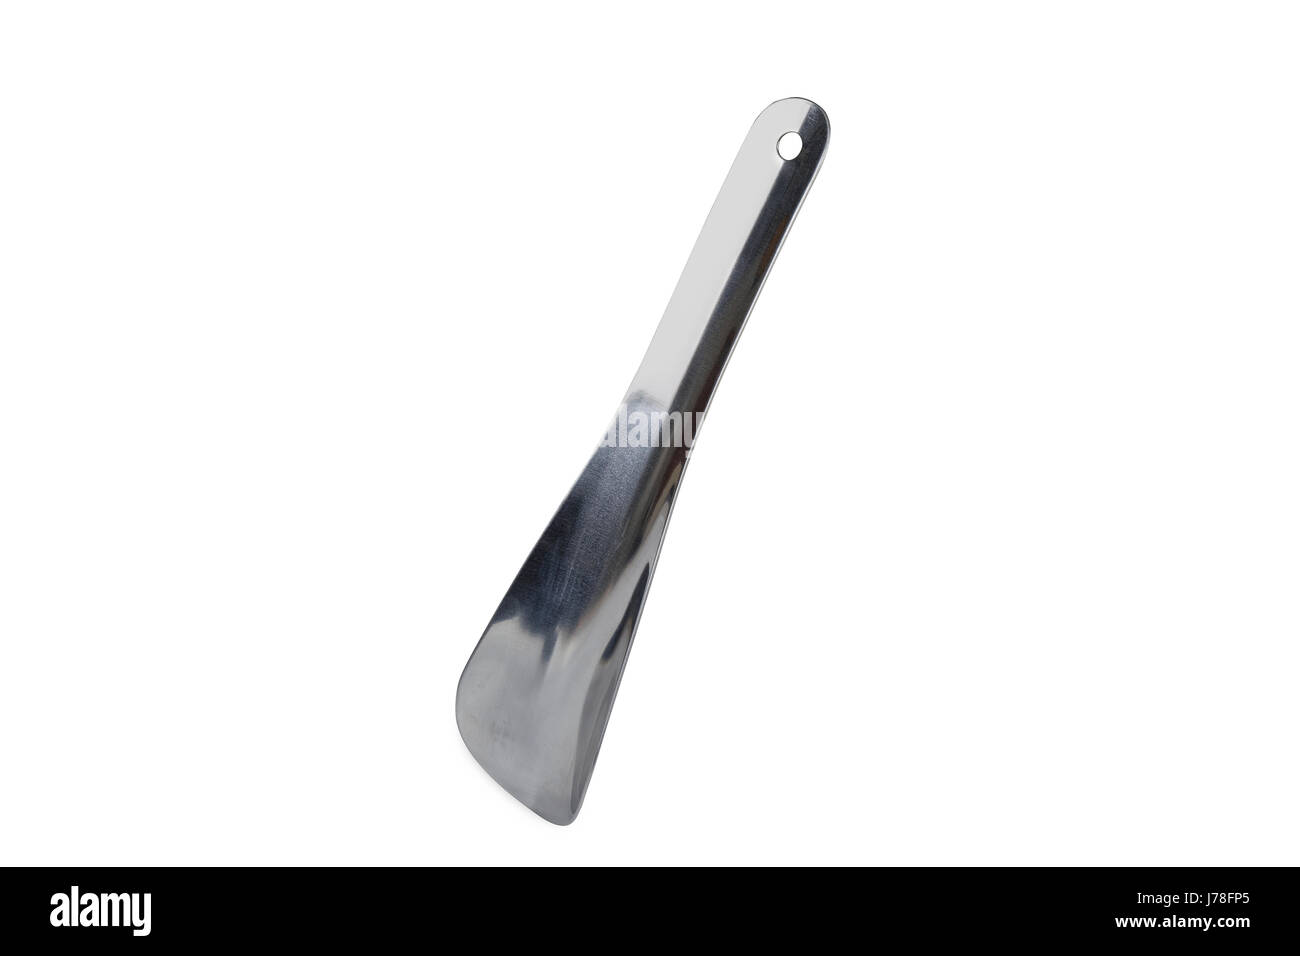 steel shoehorn isolated on white background Stock Photo